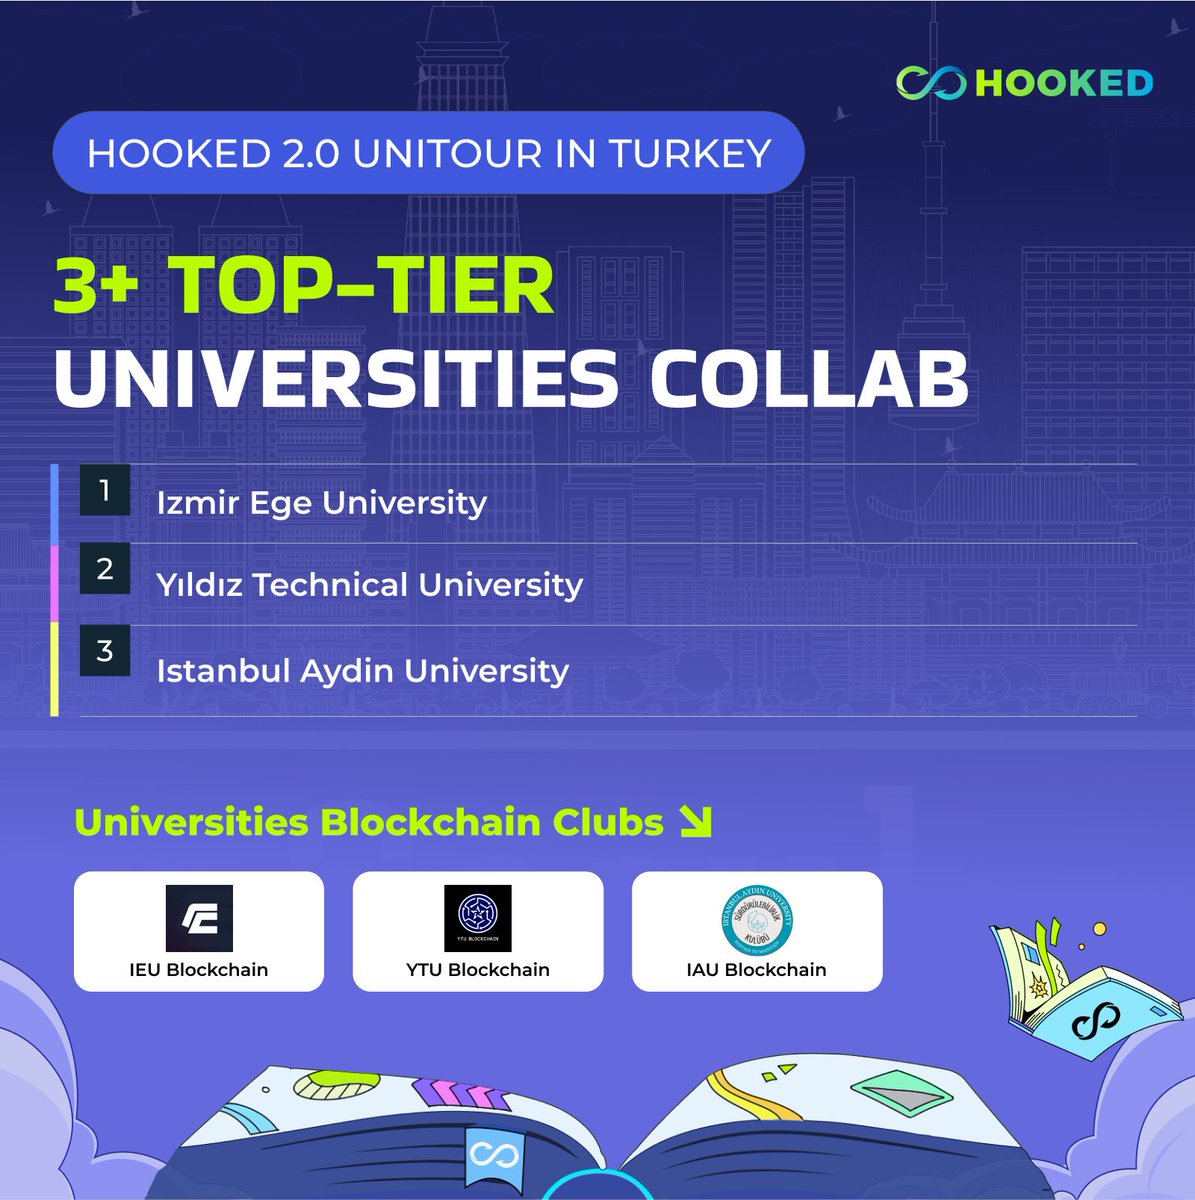 #NewEraofHOOKED #HookedUnitour 🌍 Next stop for Hooked 2.0 Global UniTour: Turkey! 🚀 Following groundbreaking collaborations in the Middle East, our European tour begins. Teaming up with academic elites, we're fueling Web3 awareness in local universities, empowering the next